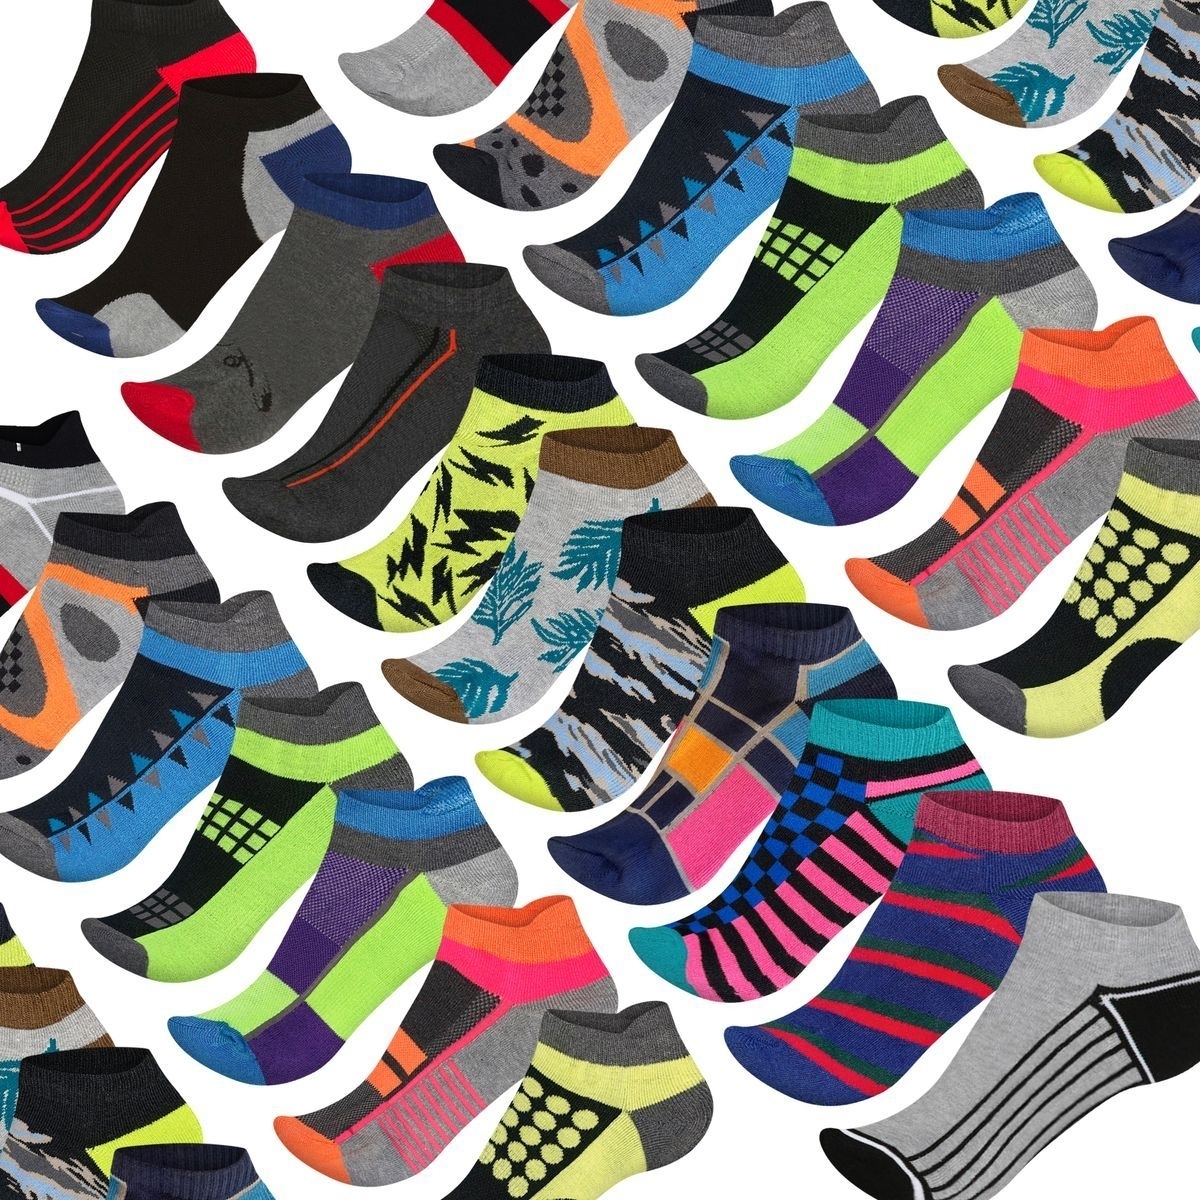 12-Pairs: Men's Moisture Wicking Mesh Performance Ankle Low Cut Cushion Athletic Sole Socks